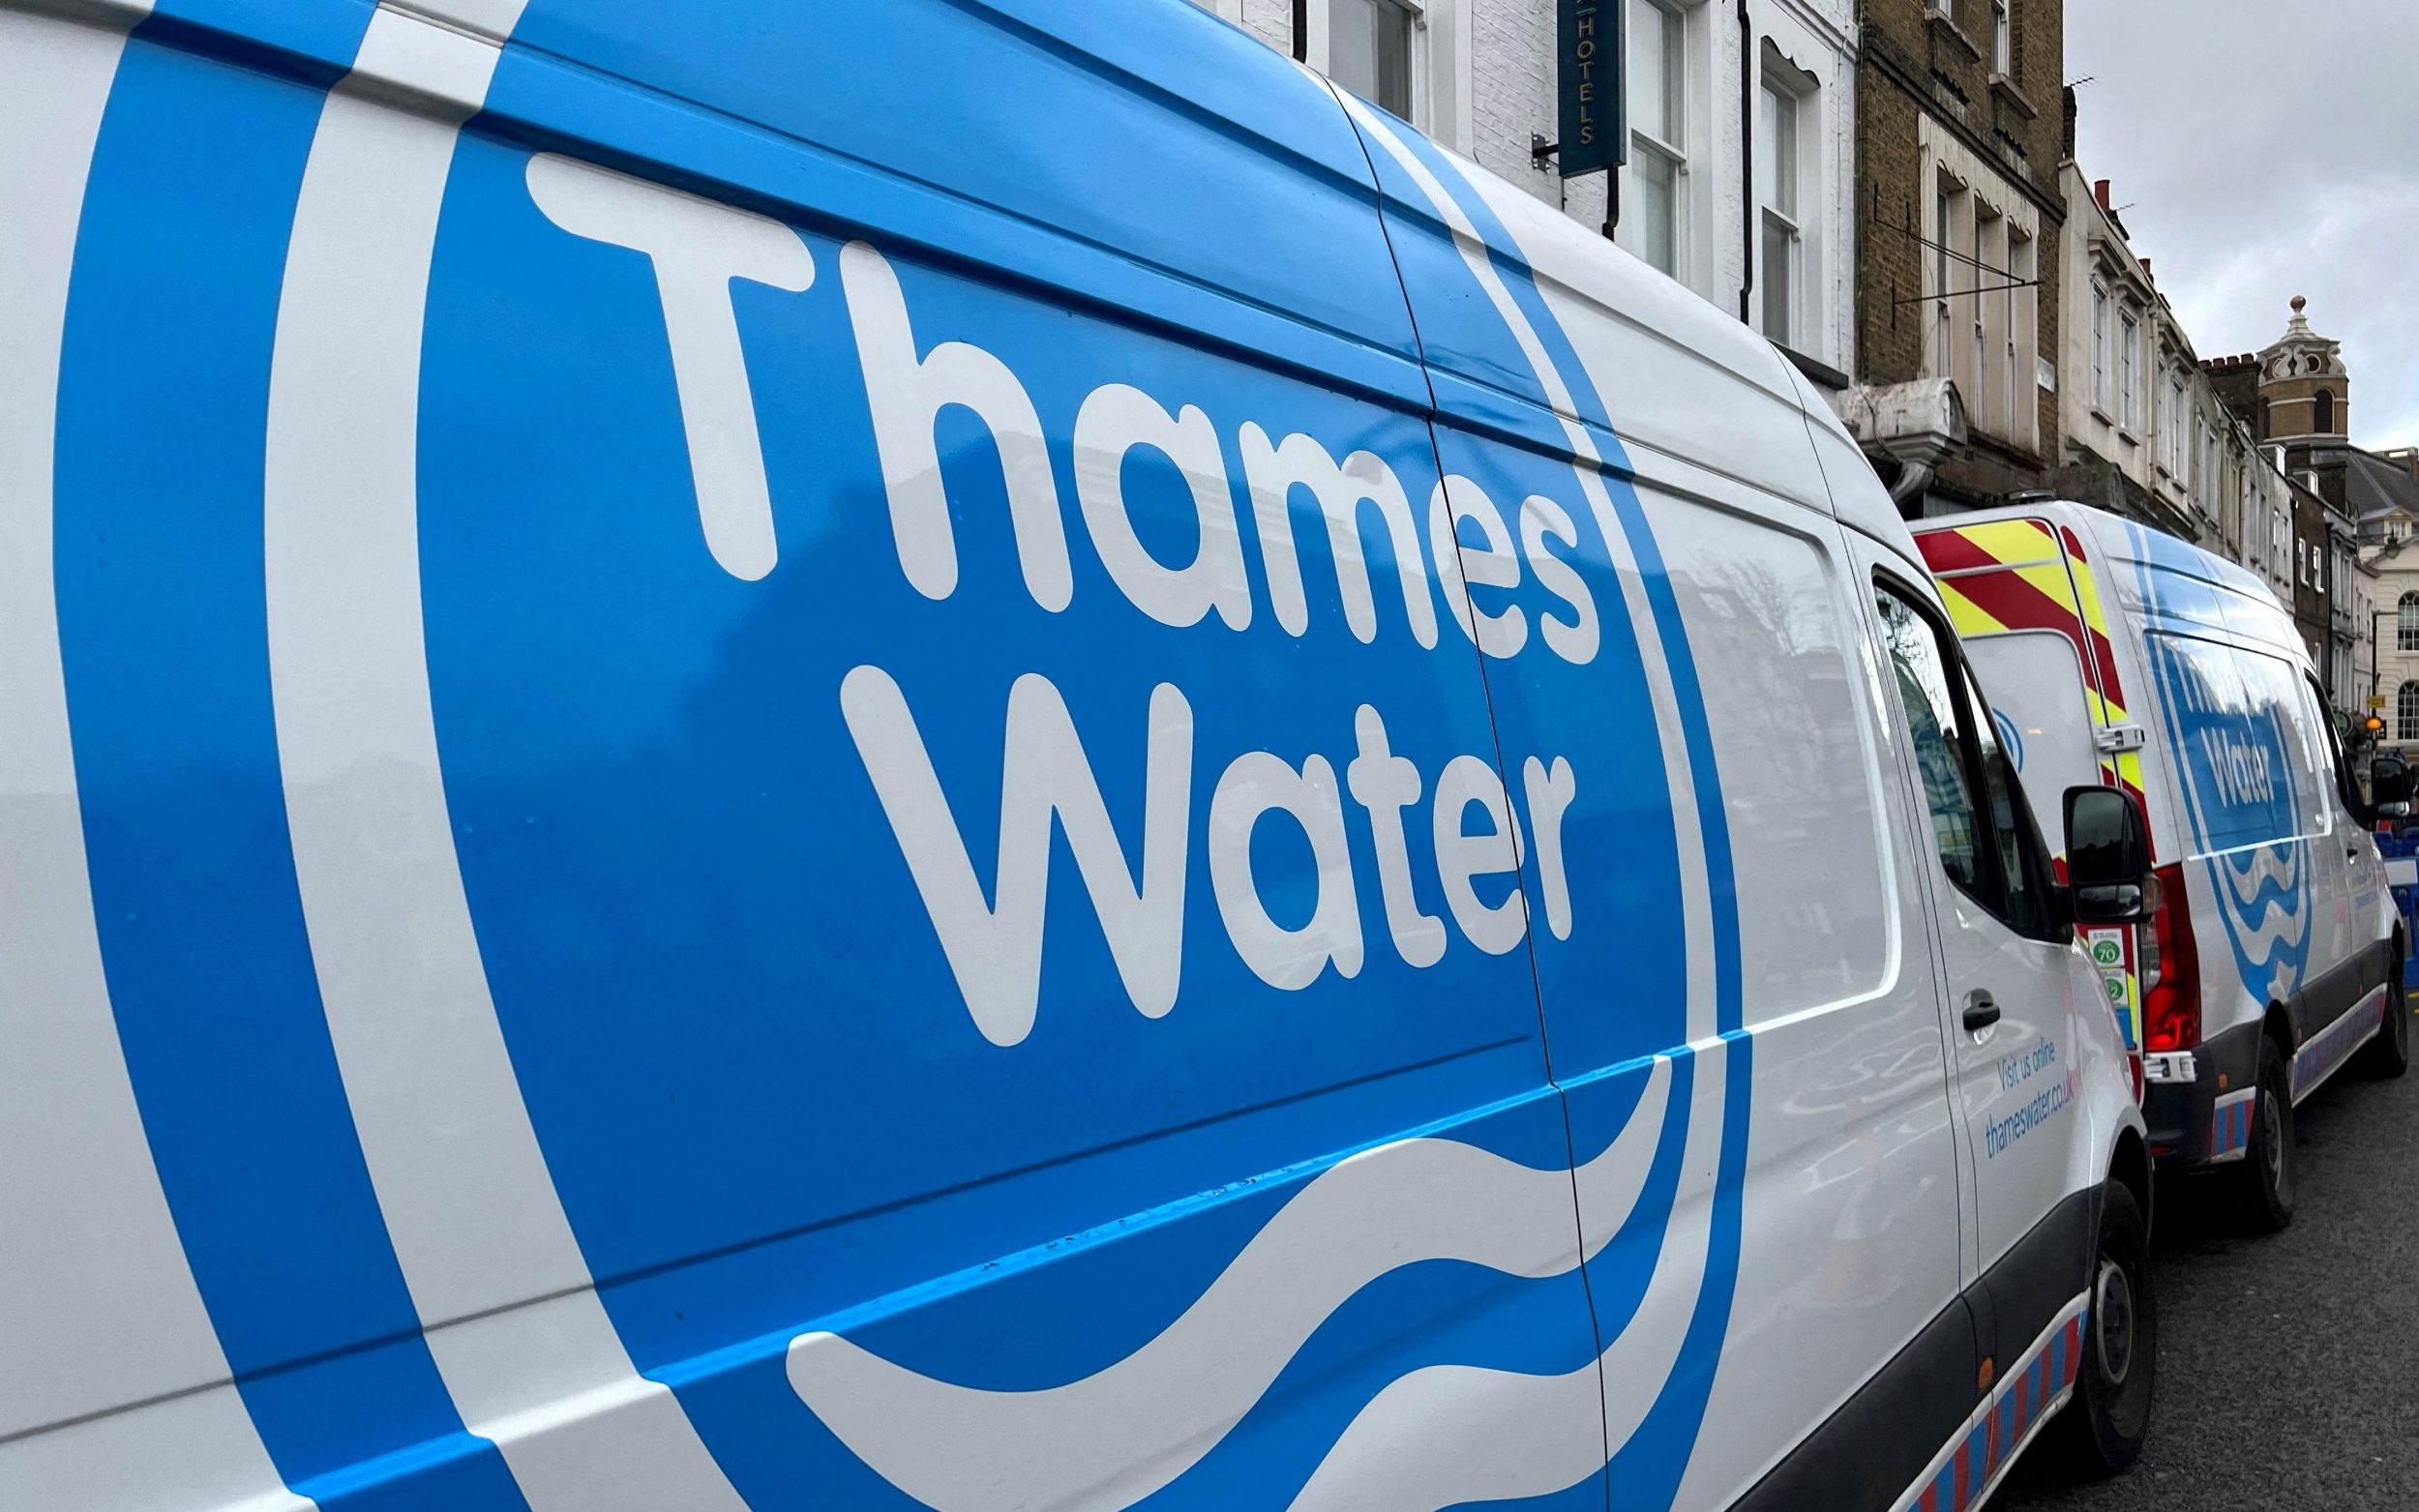 thames water plots £2bn shareholder payouts despite threat of collapse